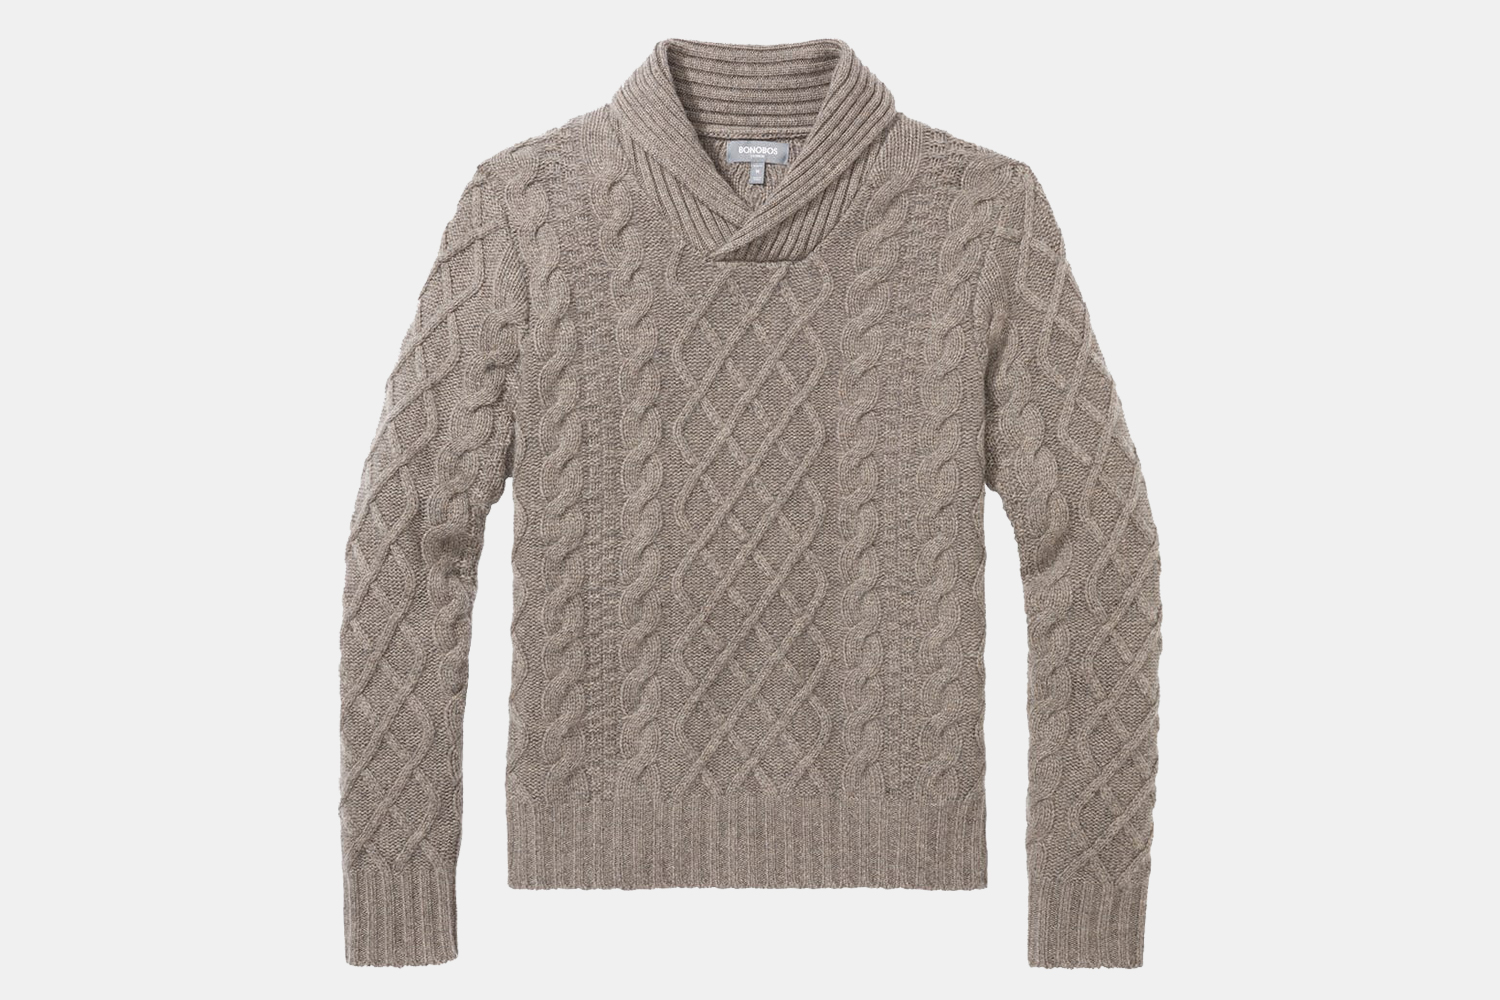 Bonobos Cashmere Cable Shawl Sweater